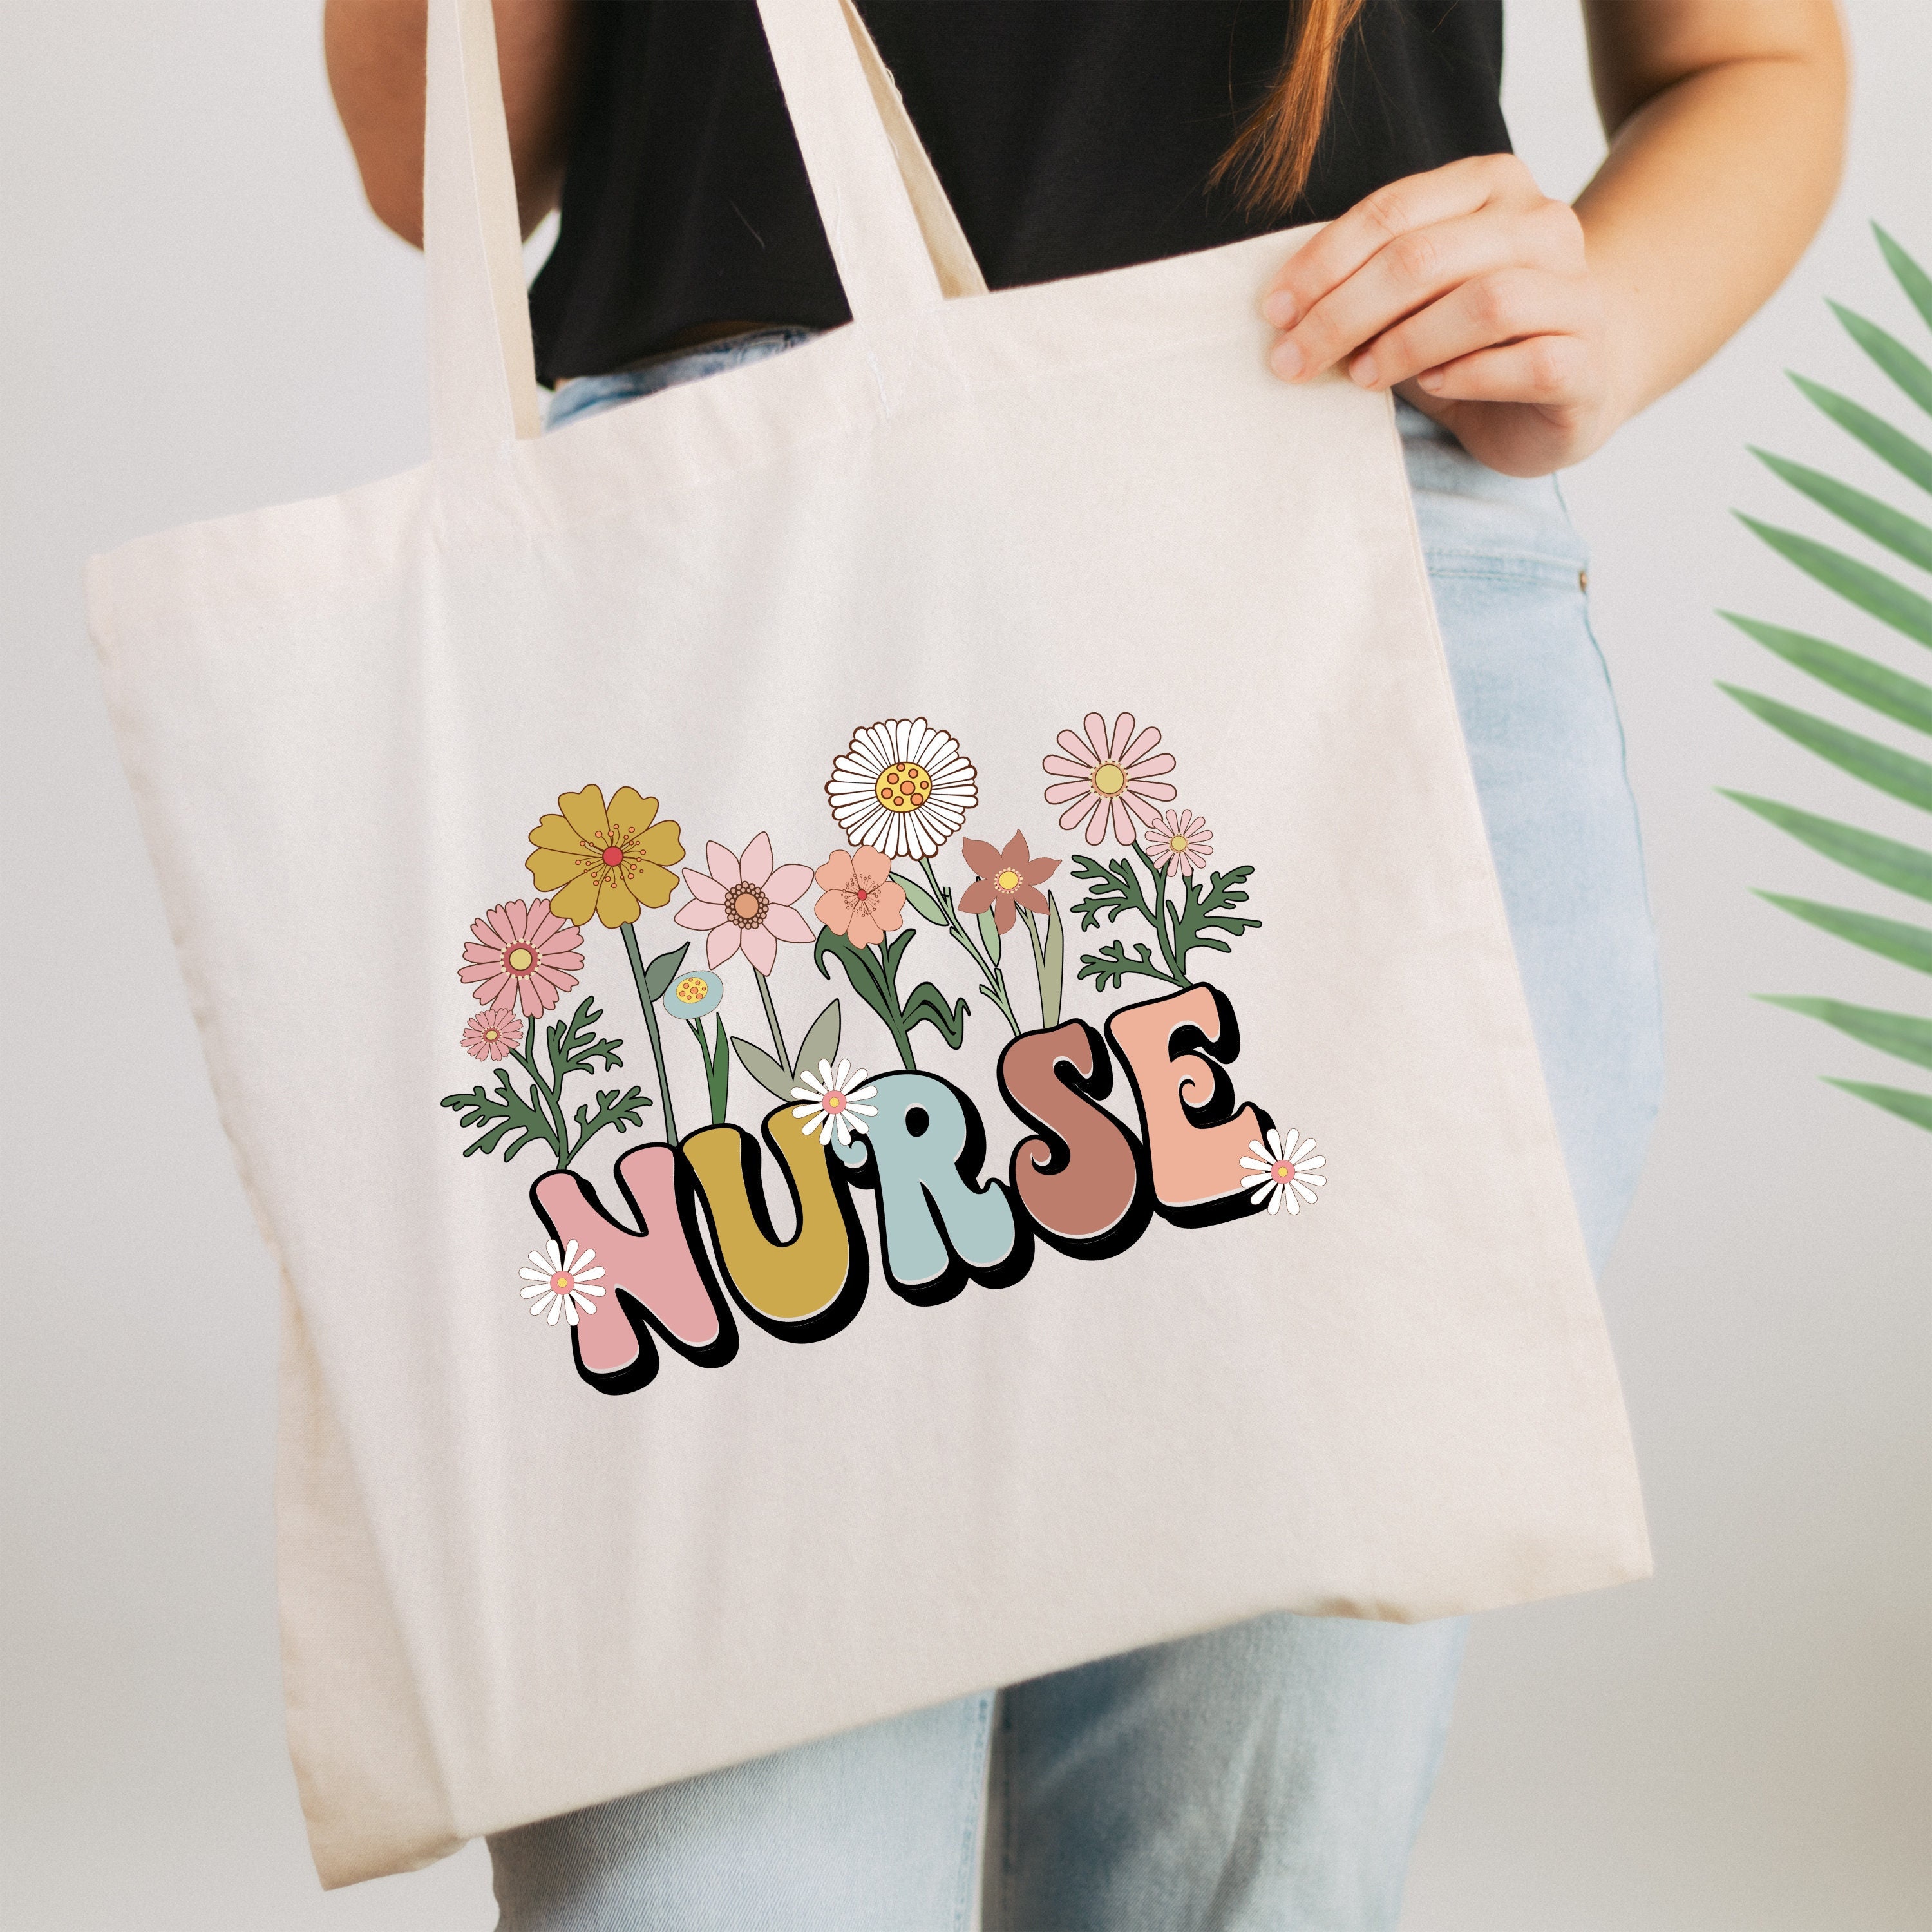 Nurse Lunch Bags for Work - Insulated Nurse Lunch Bag, Medical Tote,  Clinical Bag for Nursing Students, Nursing School Bag, CNA Bags, RN Bags,  RN Tote, Nurse Gifts for Women, Graduation 